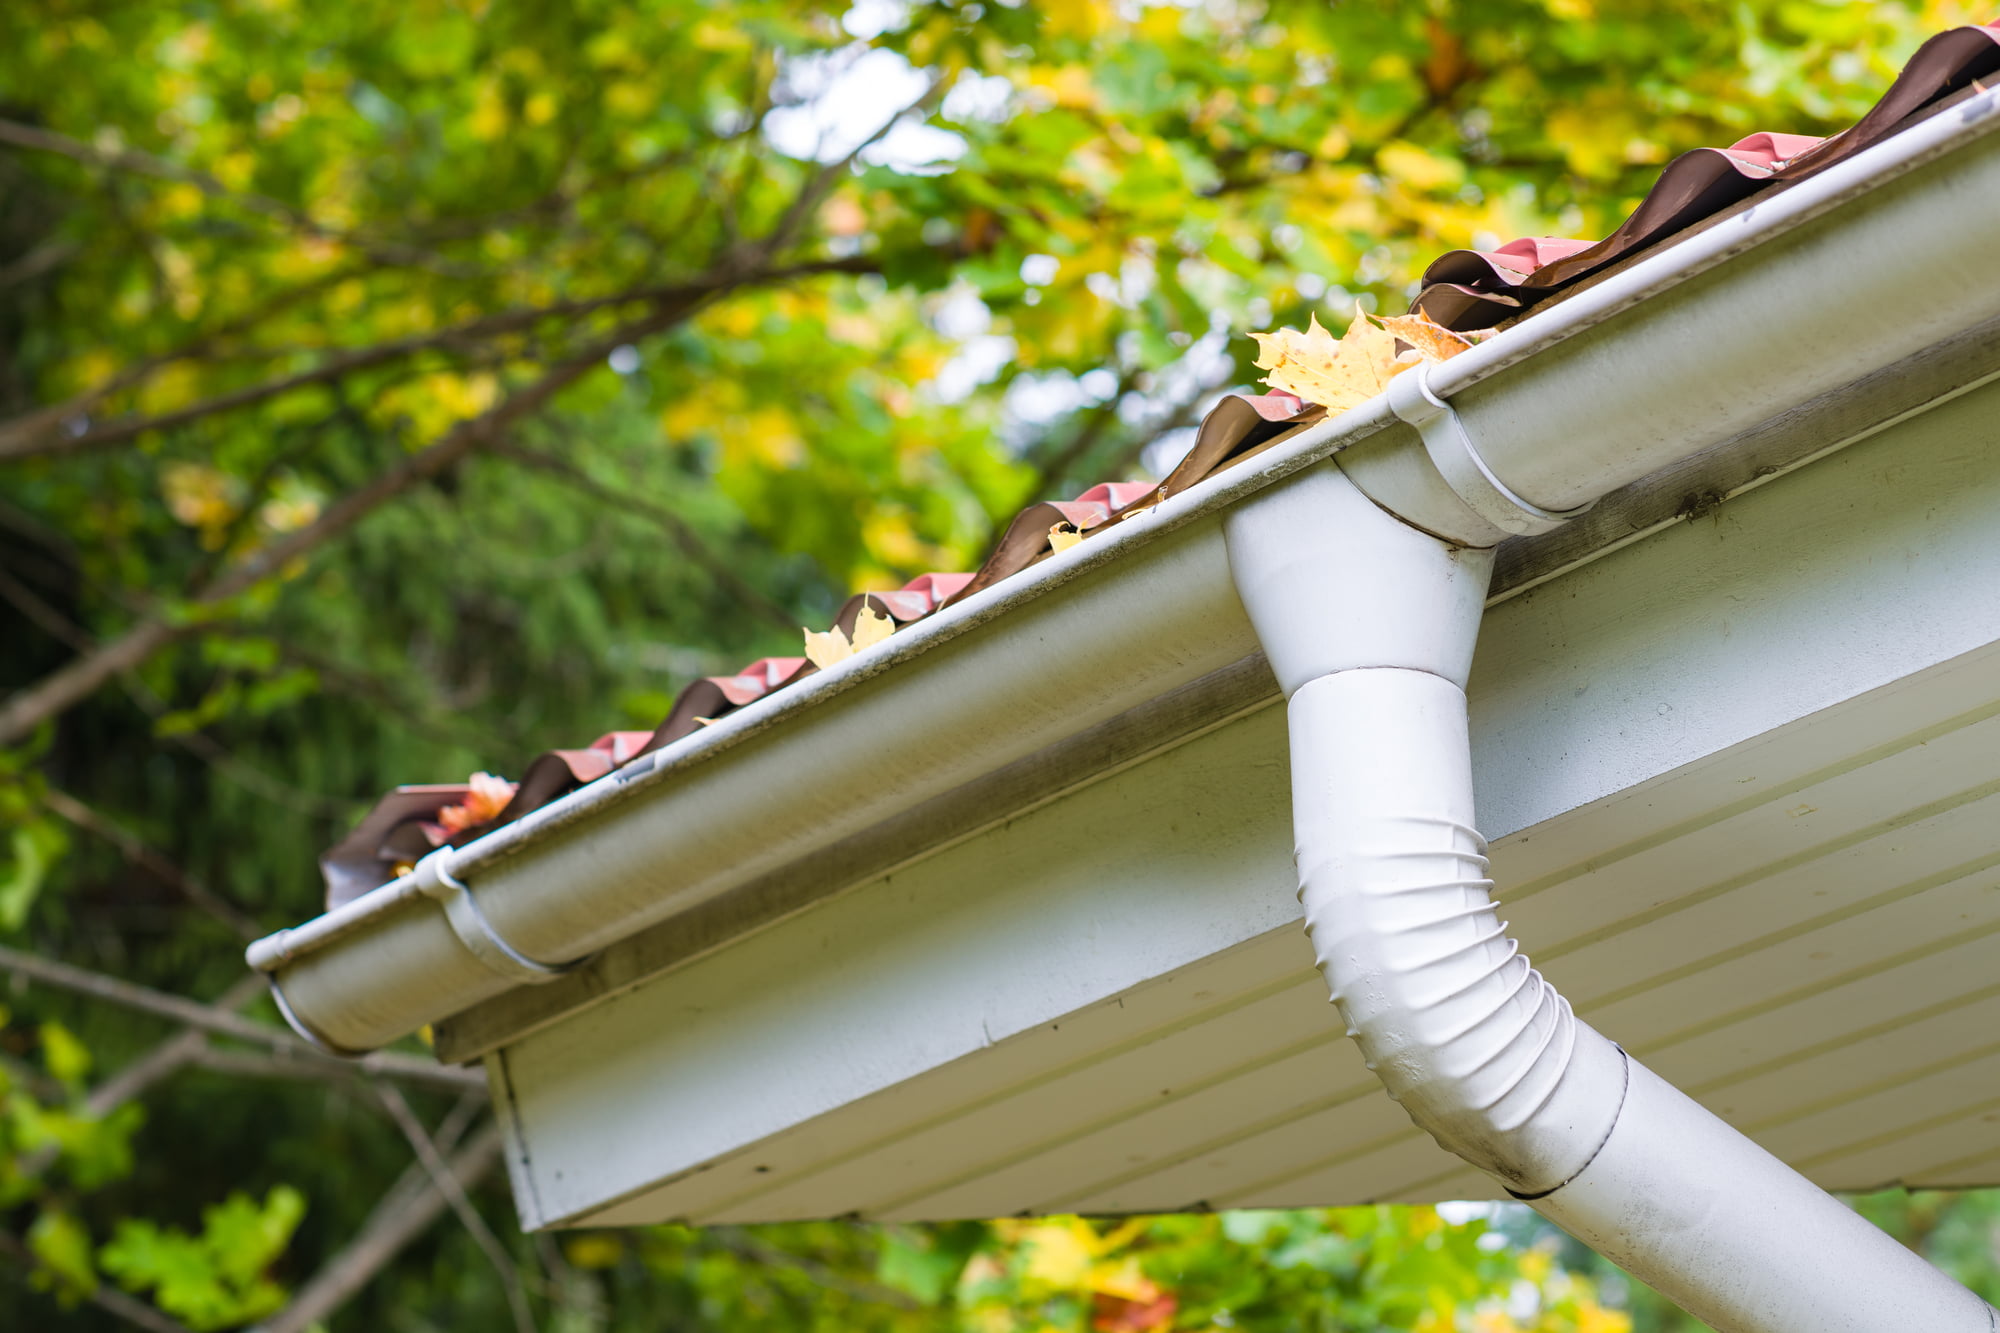 Blocked gutters and downpipes can be a serious property defect if left unrepaired. Here are the minimum requirement for gutters and downpipes in Queensland.